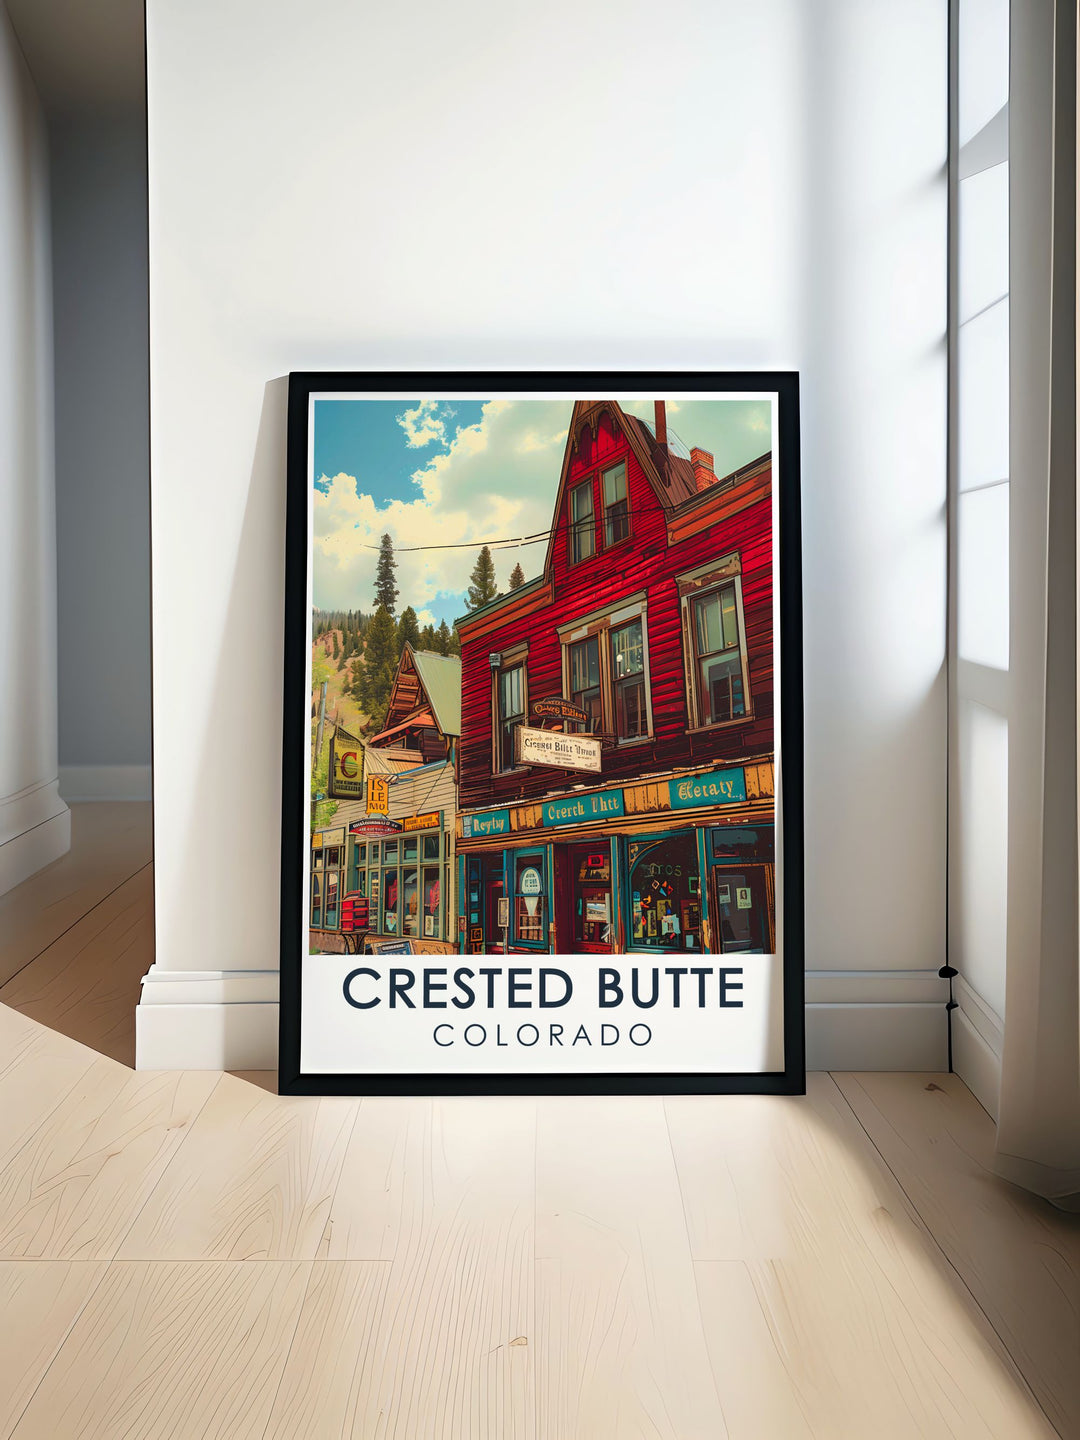 Crested Butte Mountain Resort travel poster showcasing the stunning Rocky Mountains and vibrant scenery of Colorado perfect for adding a touch of natural beauty to your home decor and celebrating your love for Crested Butte and Colorados breathtaking landscapes.